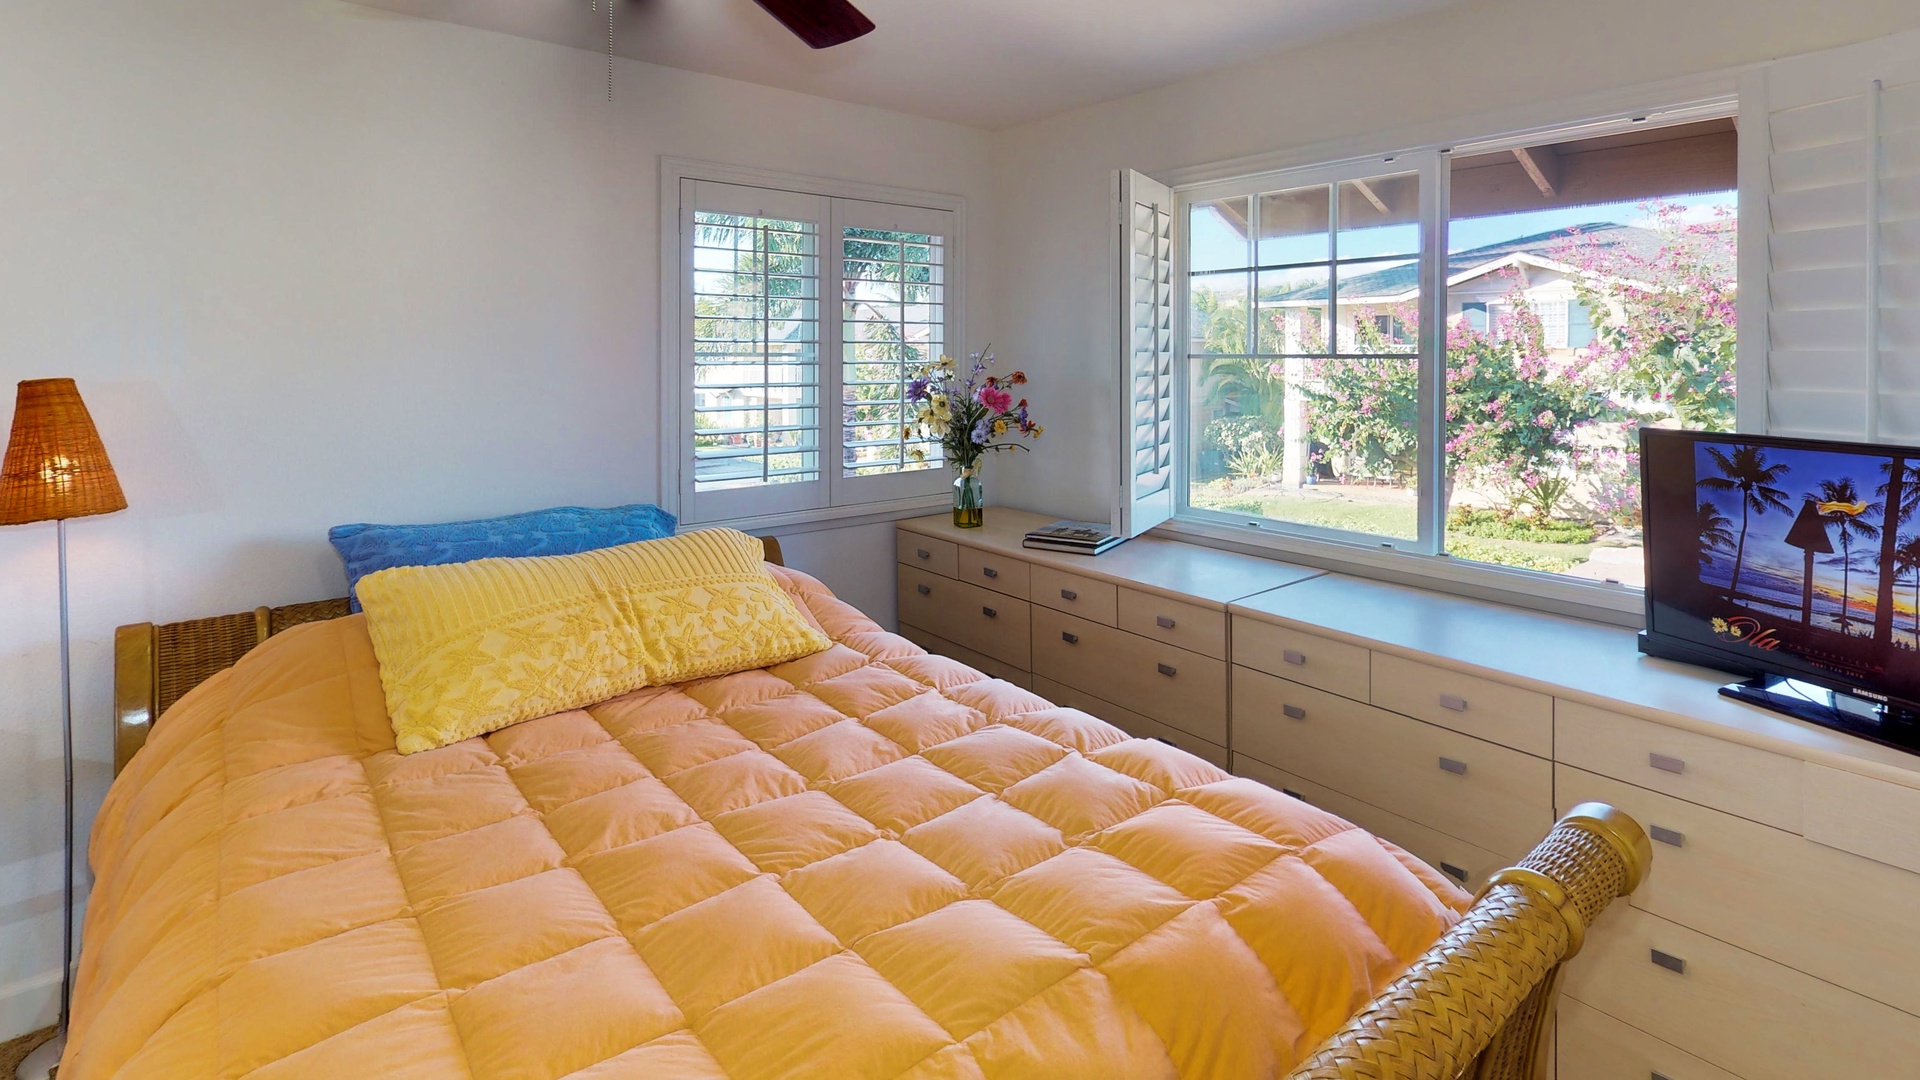 Kapolei Vacation Rentals, Ko Olina Kai Estate #17 - The third guest bedroom has a queen bed and large window.